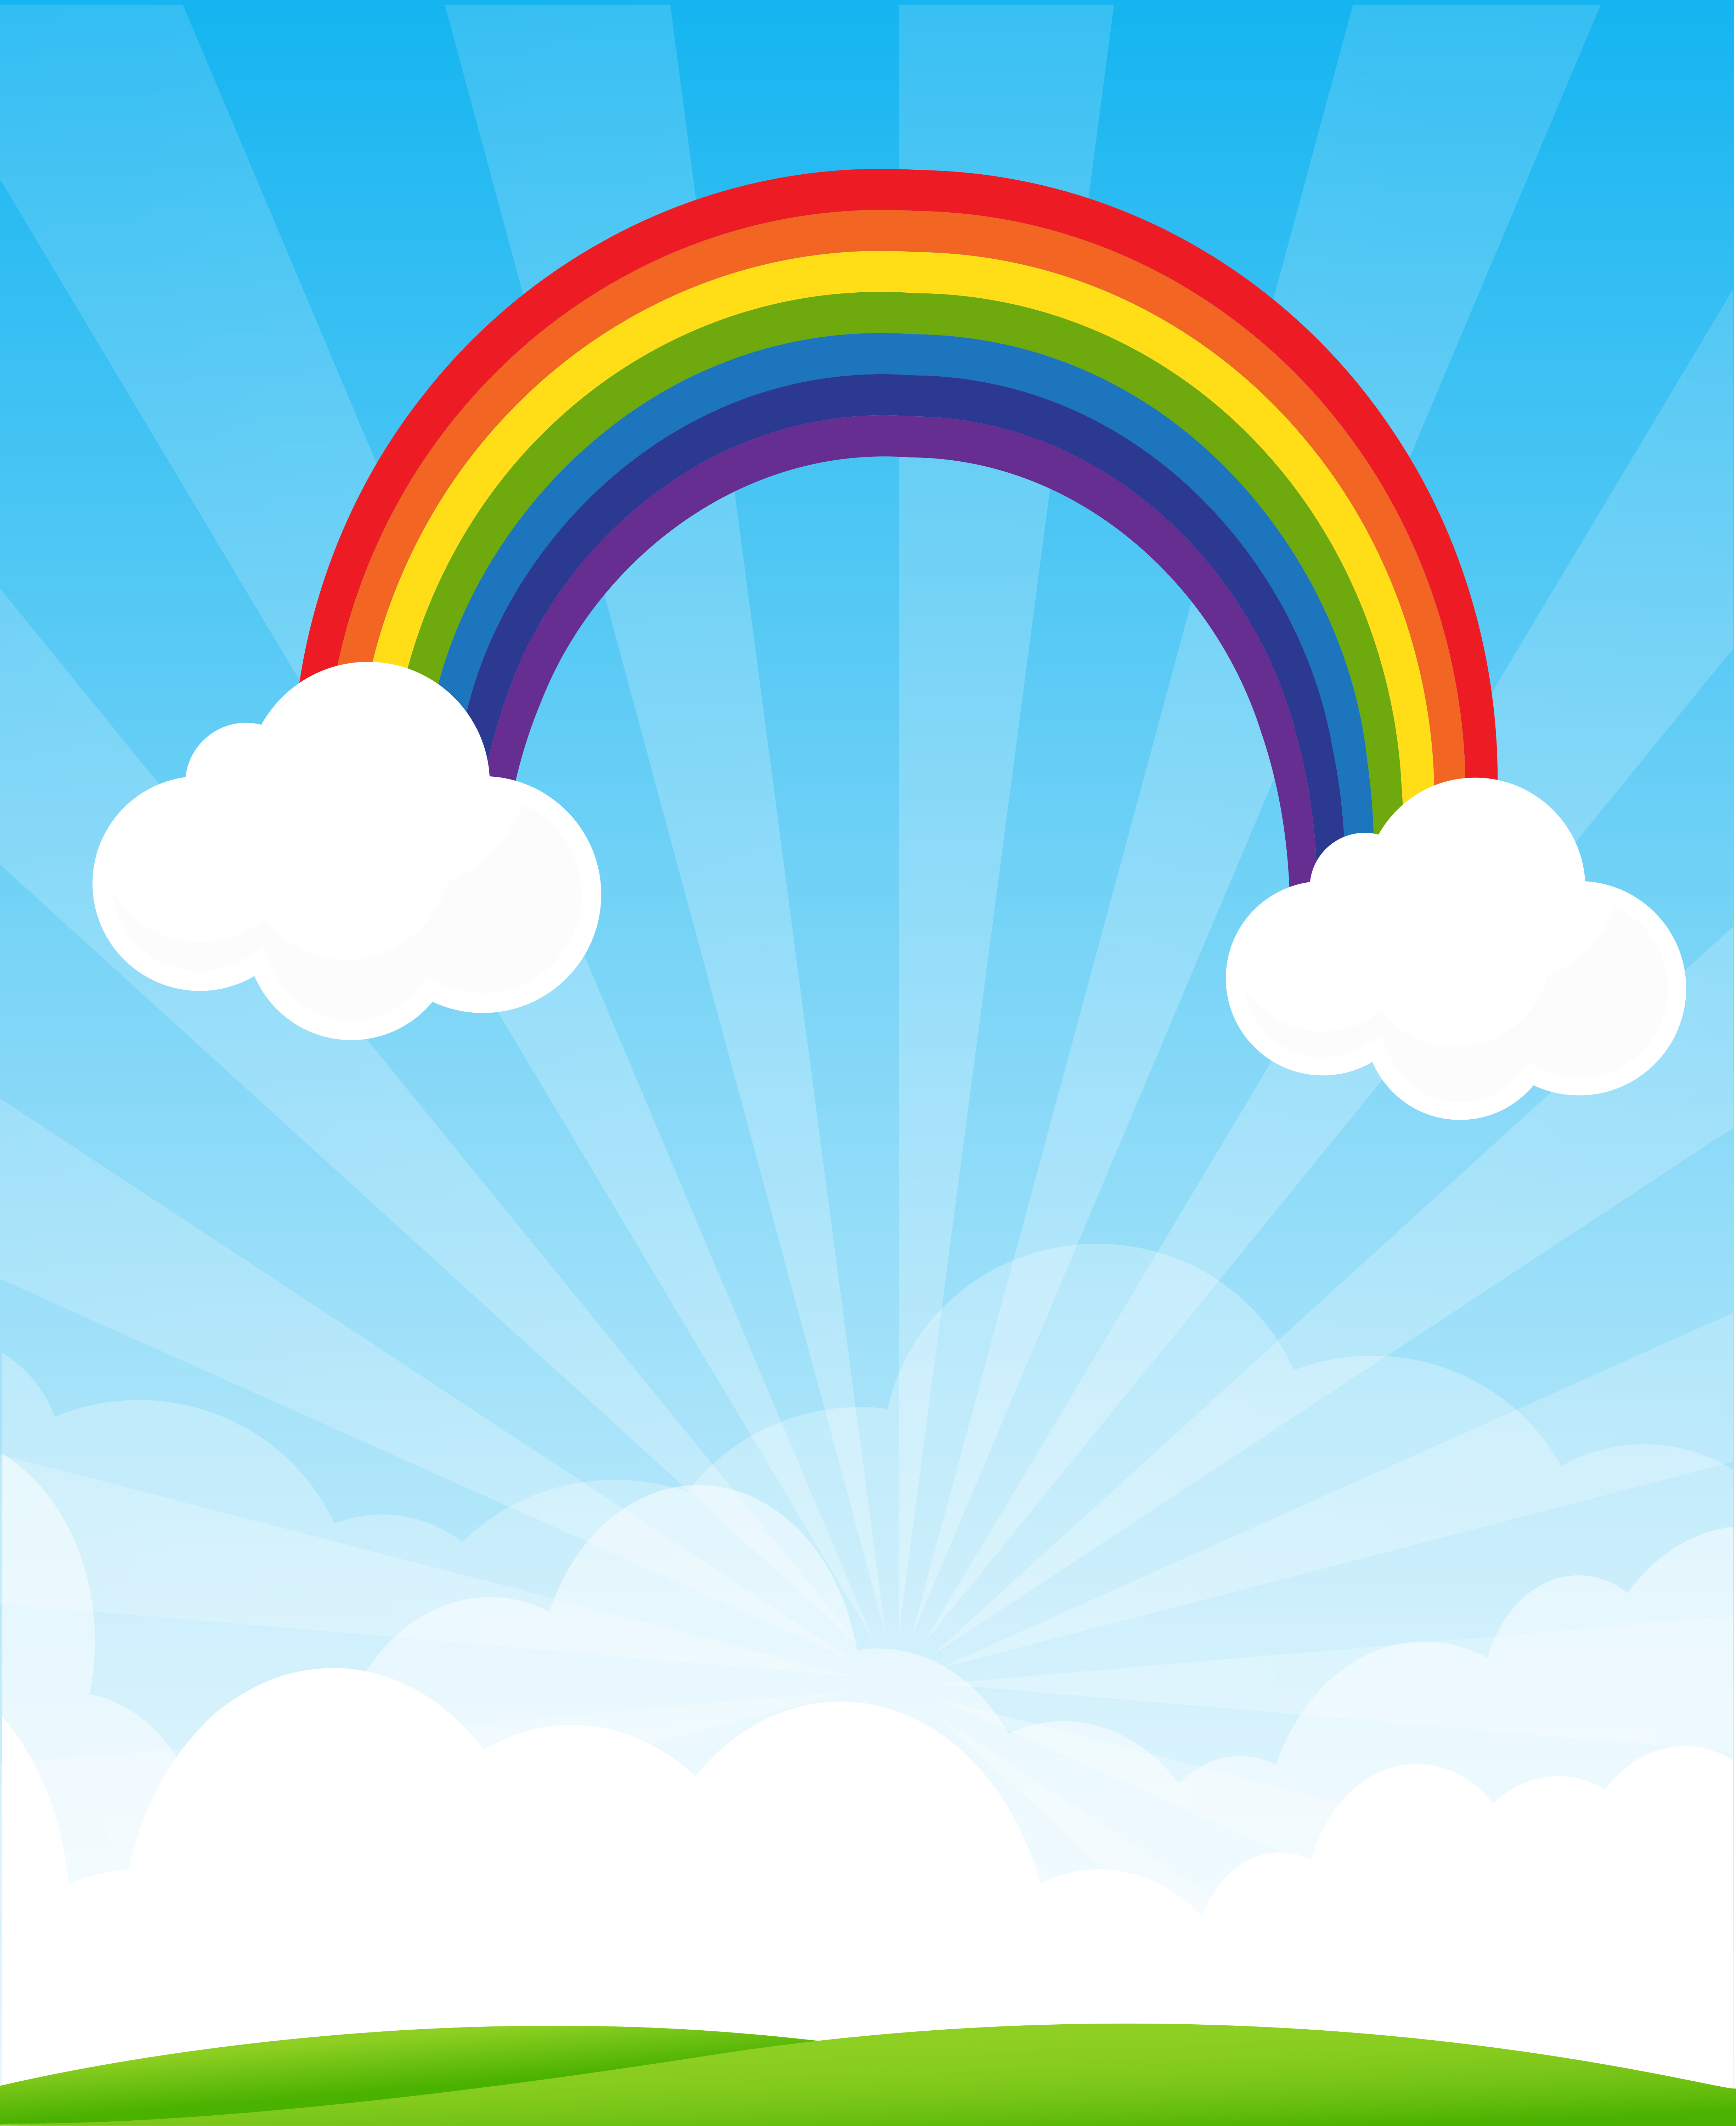 Sunburst and blue sky and rainbow background with copyspace.